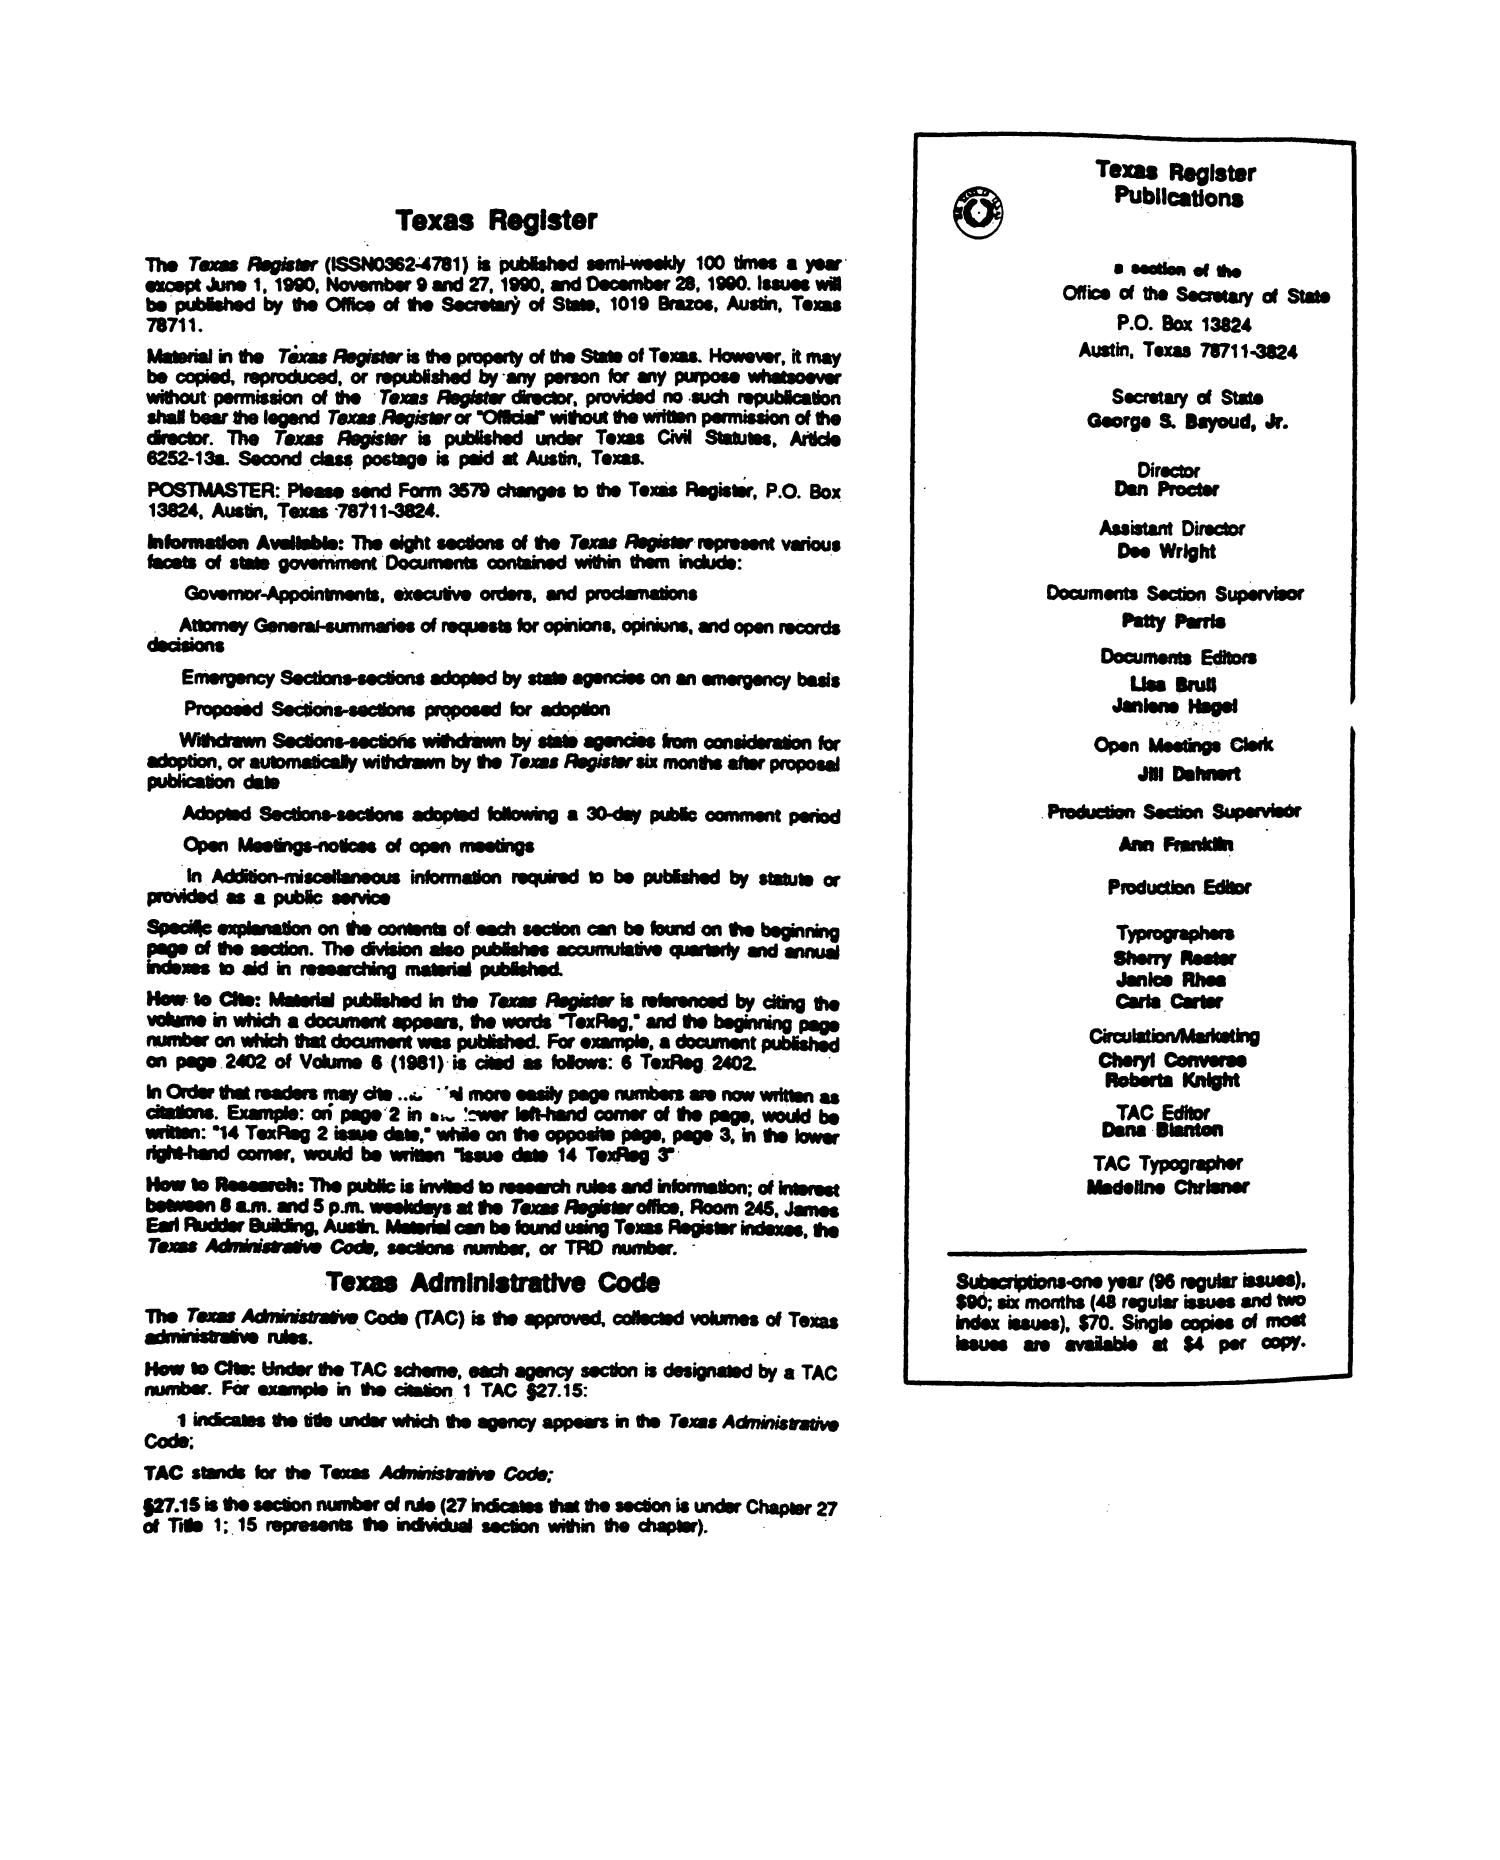 Texas Register Volume 16, Number 1, Pages 1-62, January 1, 1991
                                                
                                                    None
                                                